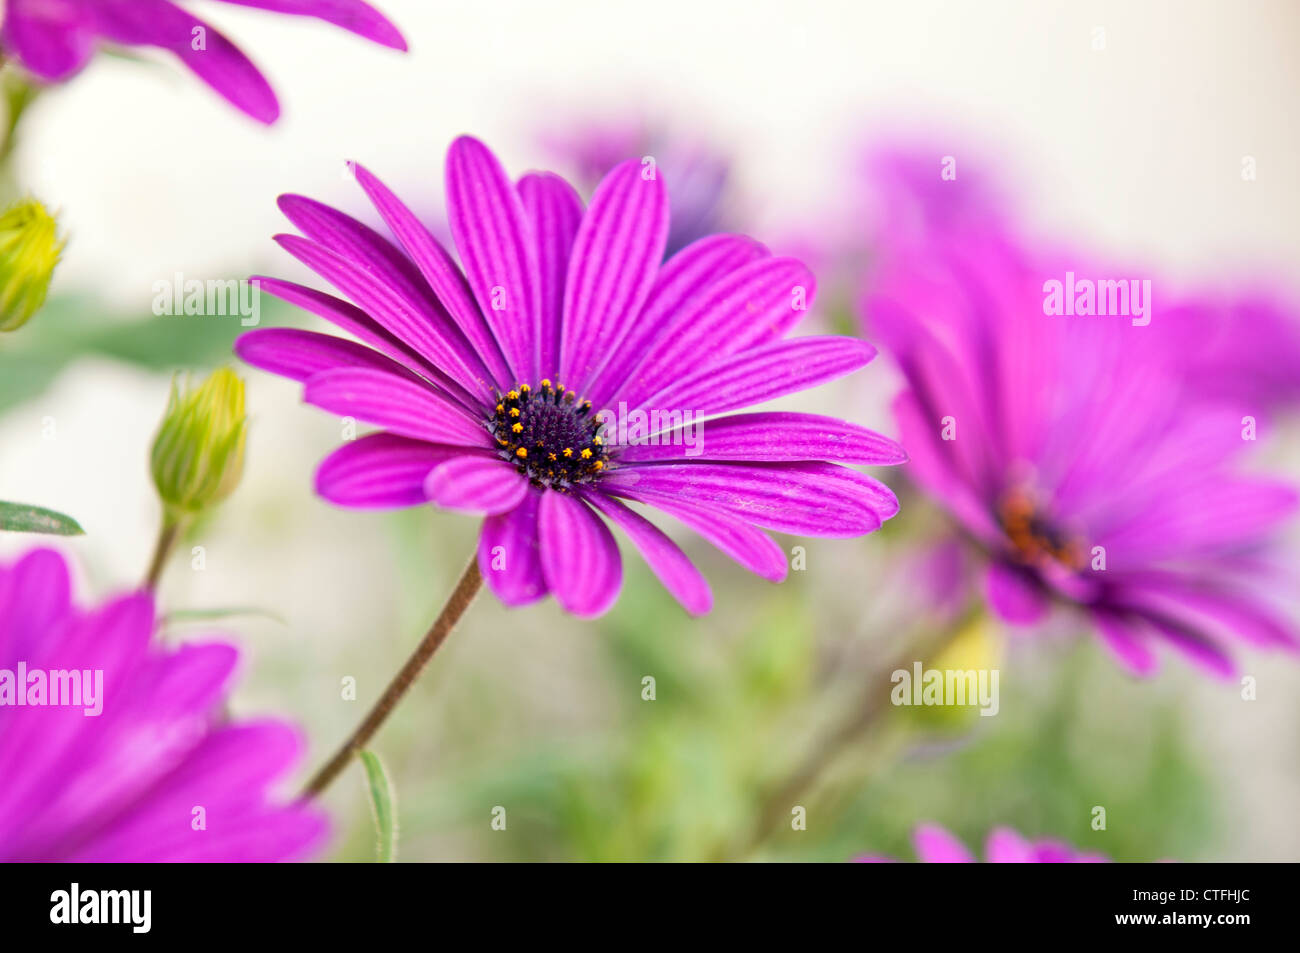 Floral details of Osteospermum. It is known as African daisy. Stock Photo